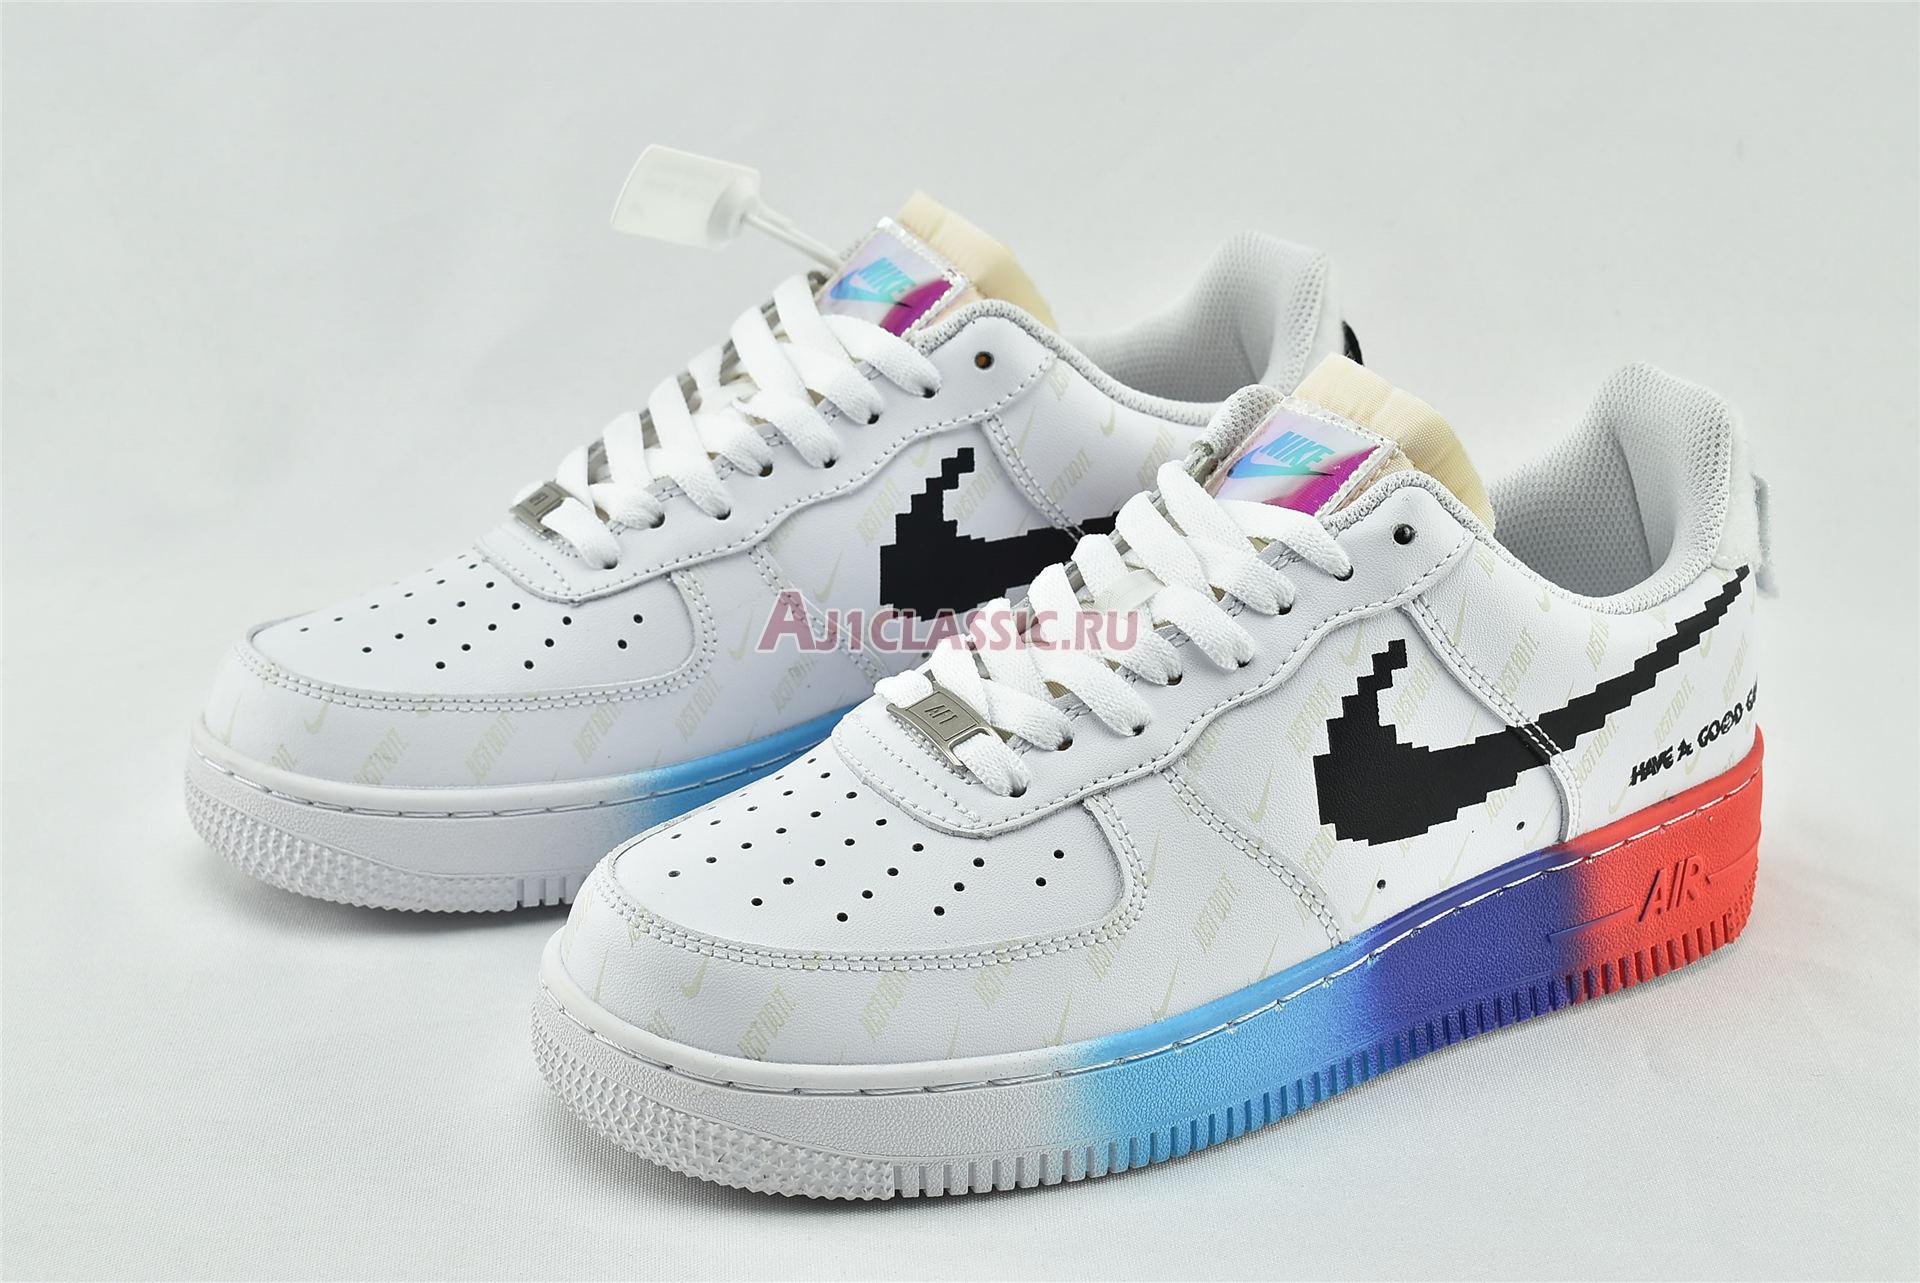 Nike Air Force 1 Low "Have A Good Game" 318155-113